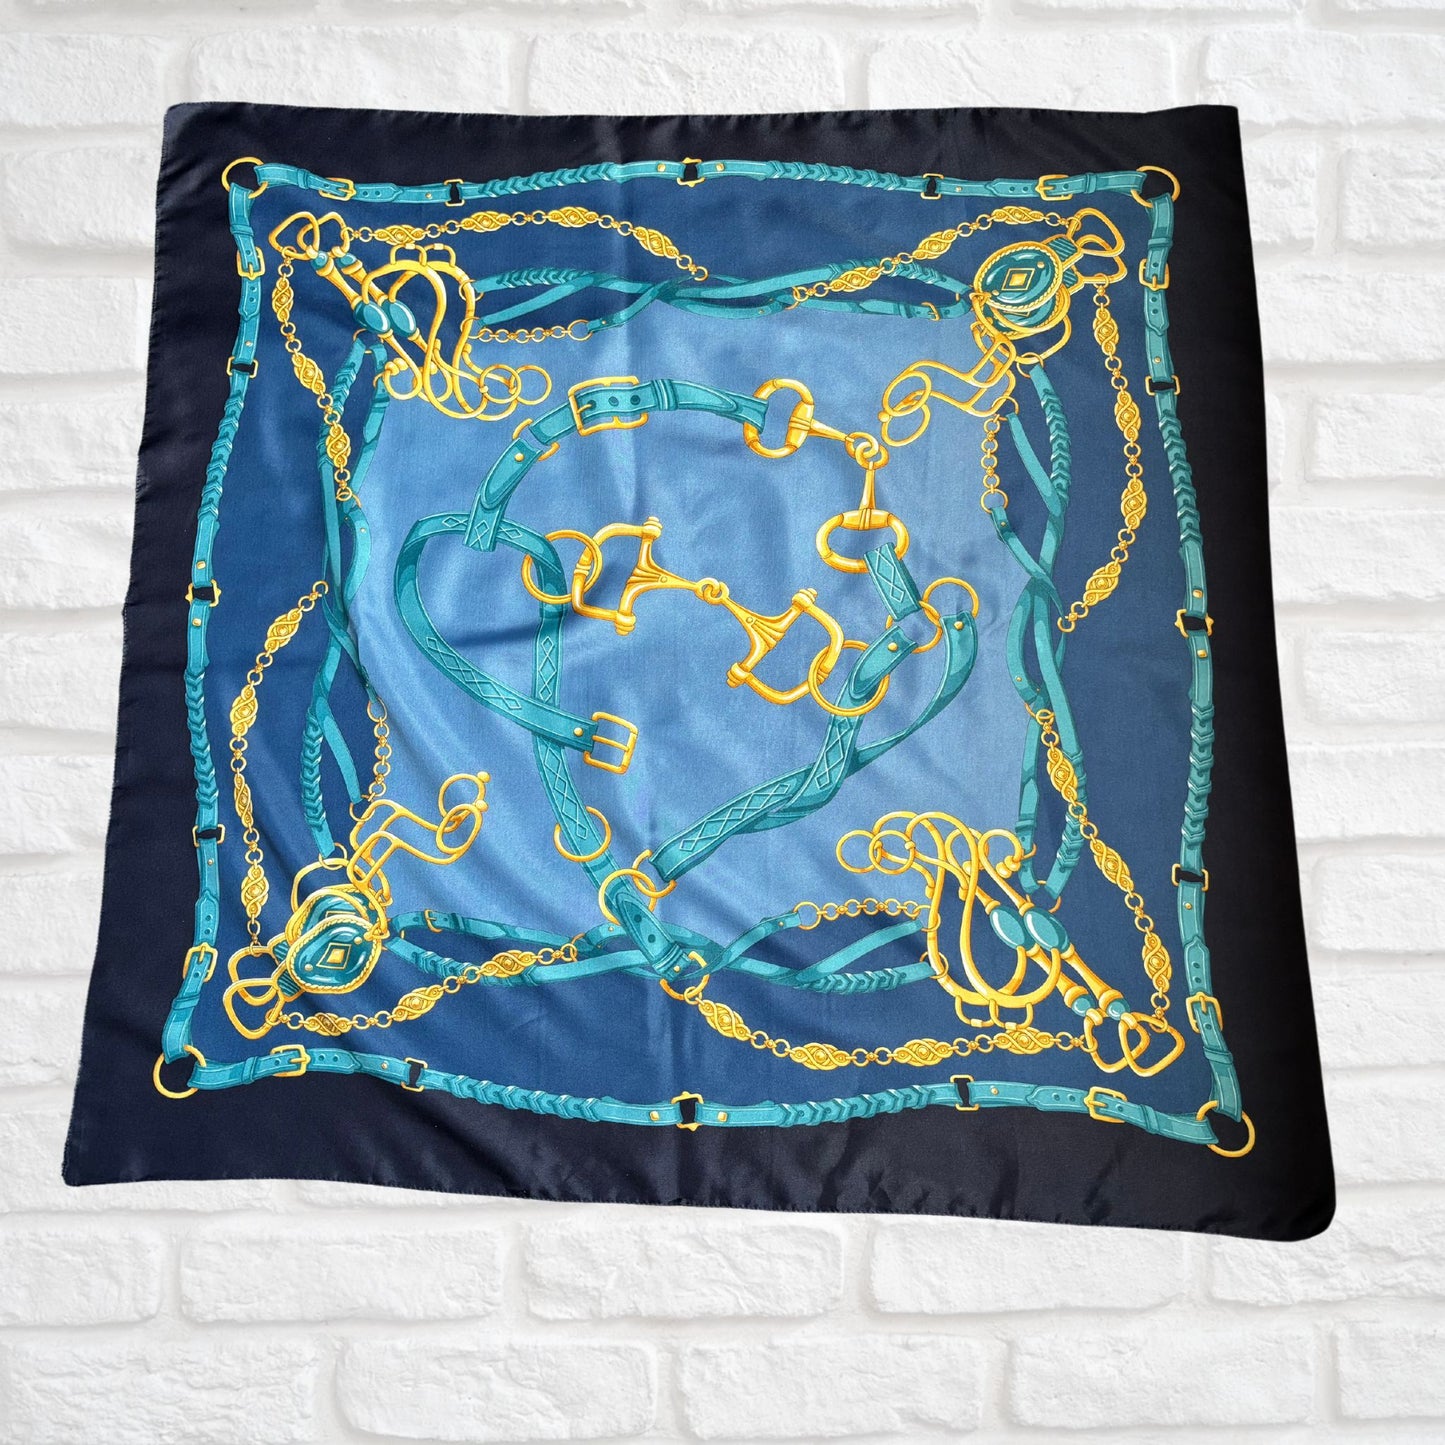 Blue and Gold Equestrian Style Large Square Vintage Scarf. Great Gift idea